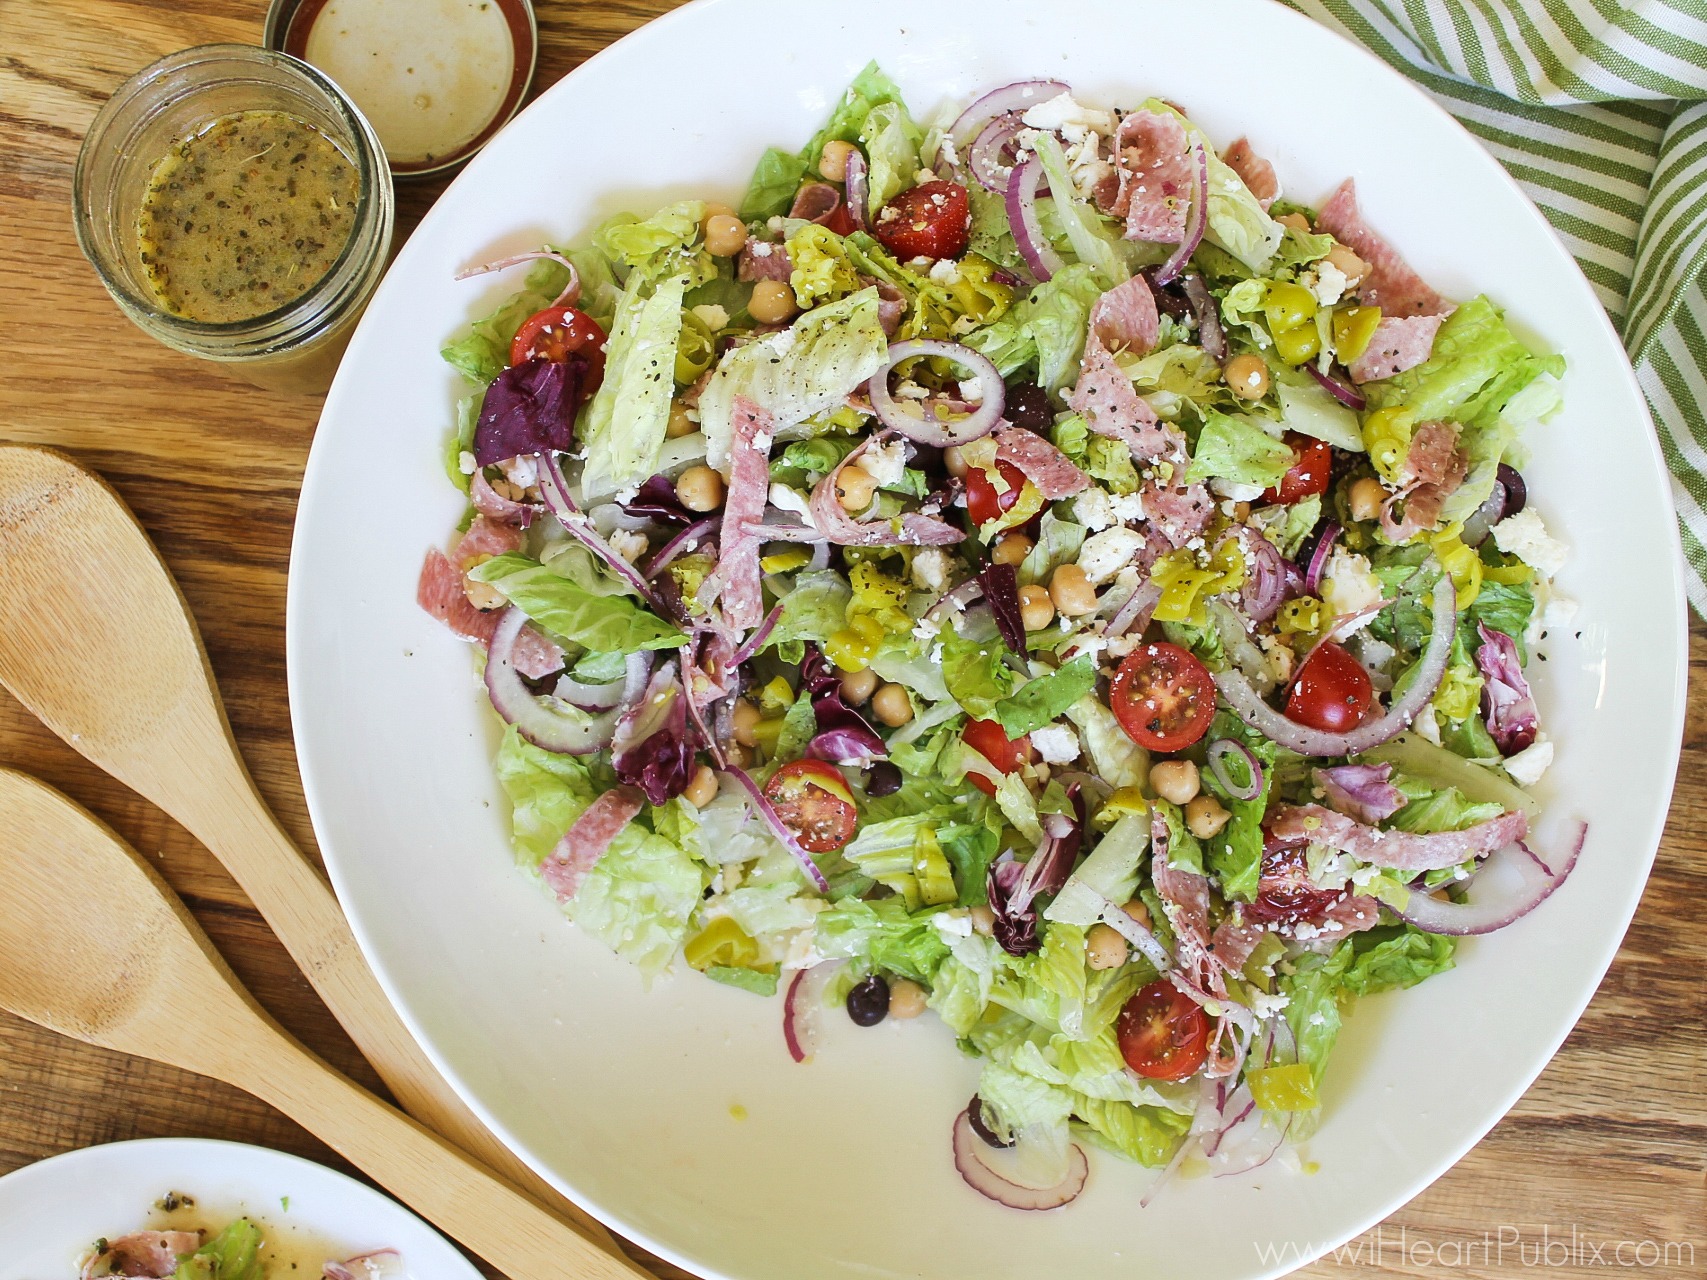 Easy Italian Chopped Salad - Super Meal To Go With The Sales At Publix on I Heart Publix